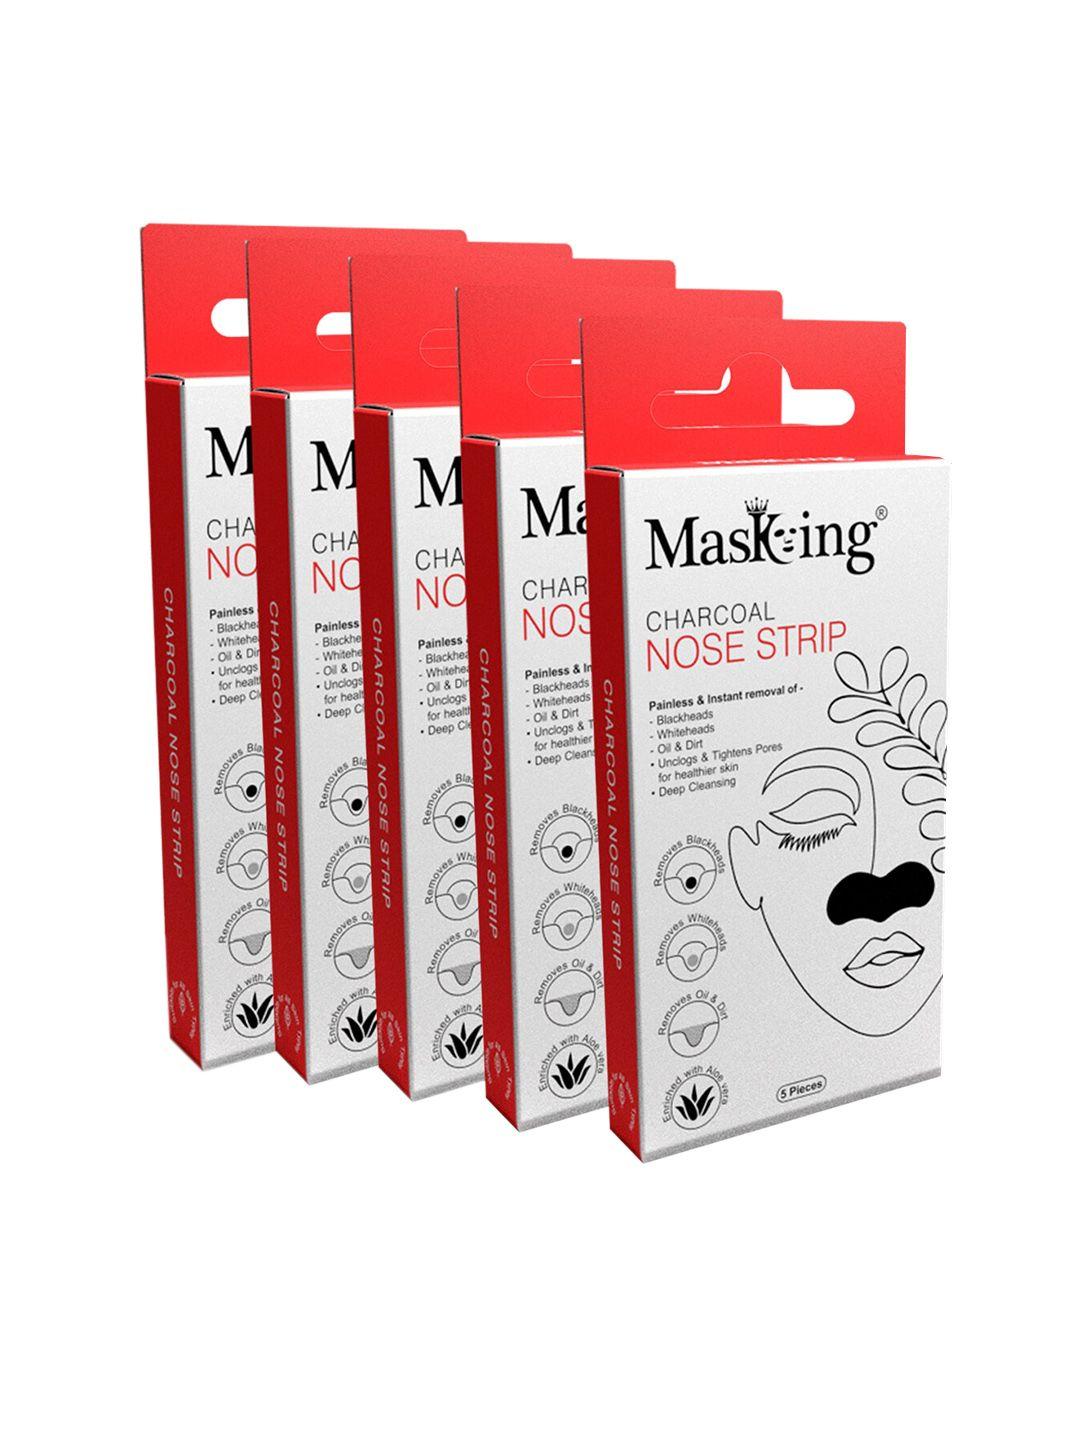 masking unisex pack of 25 charcoal nose stripes for blackheads removal